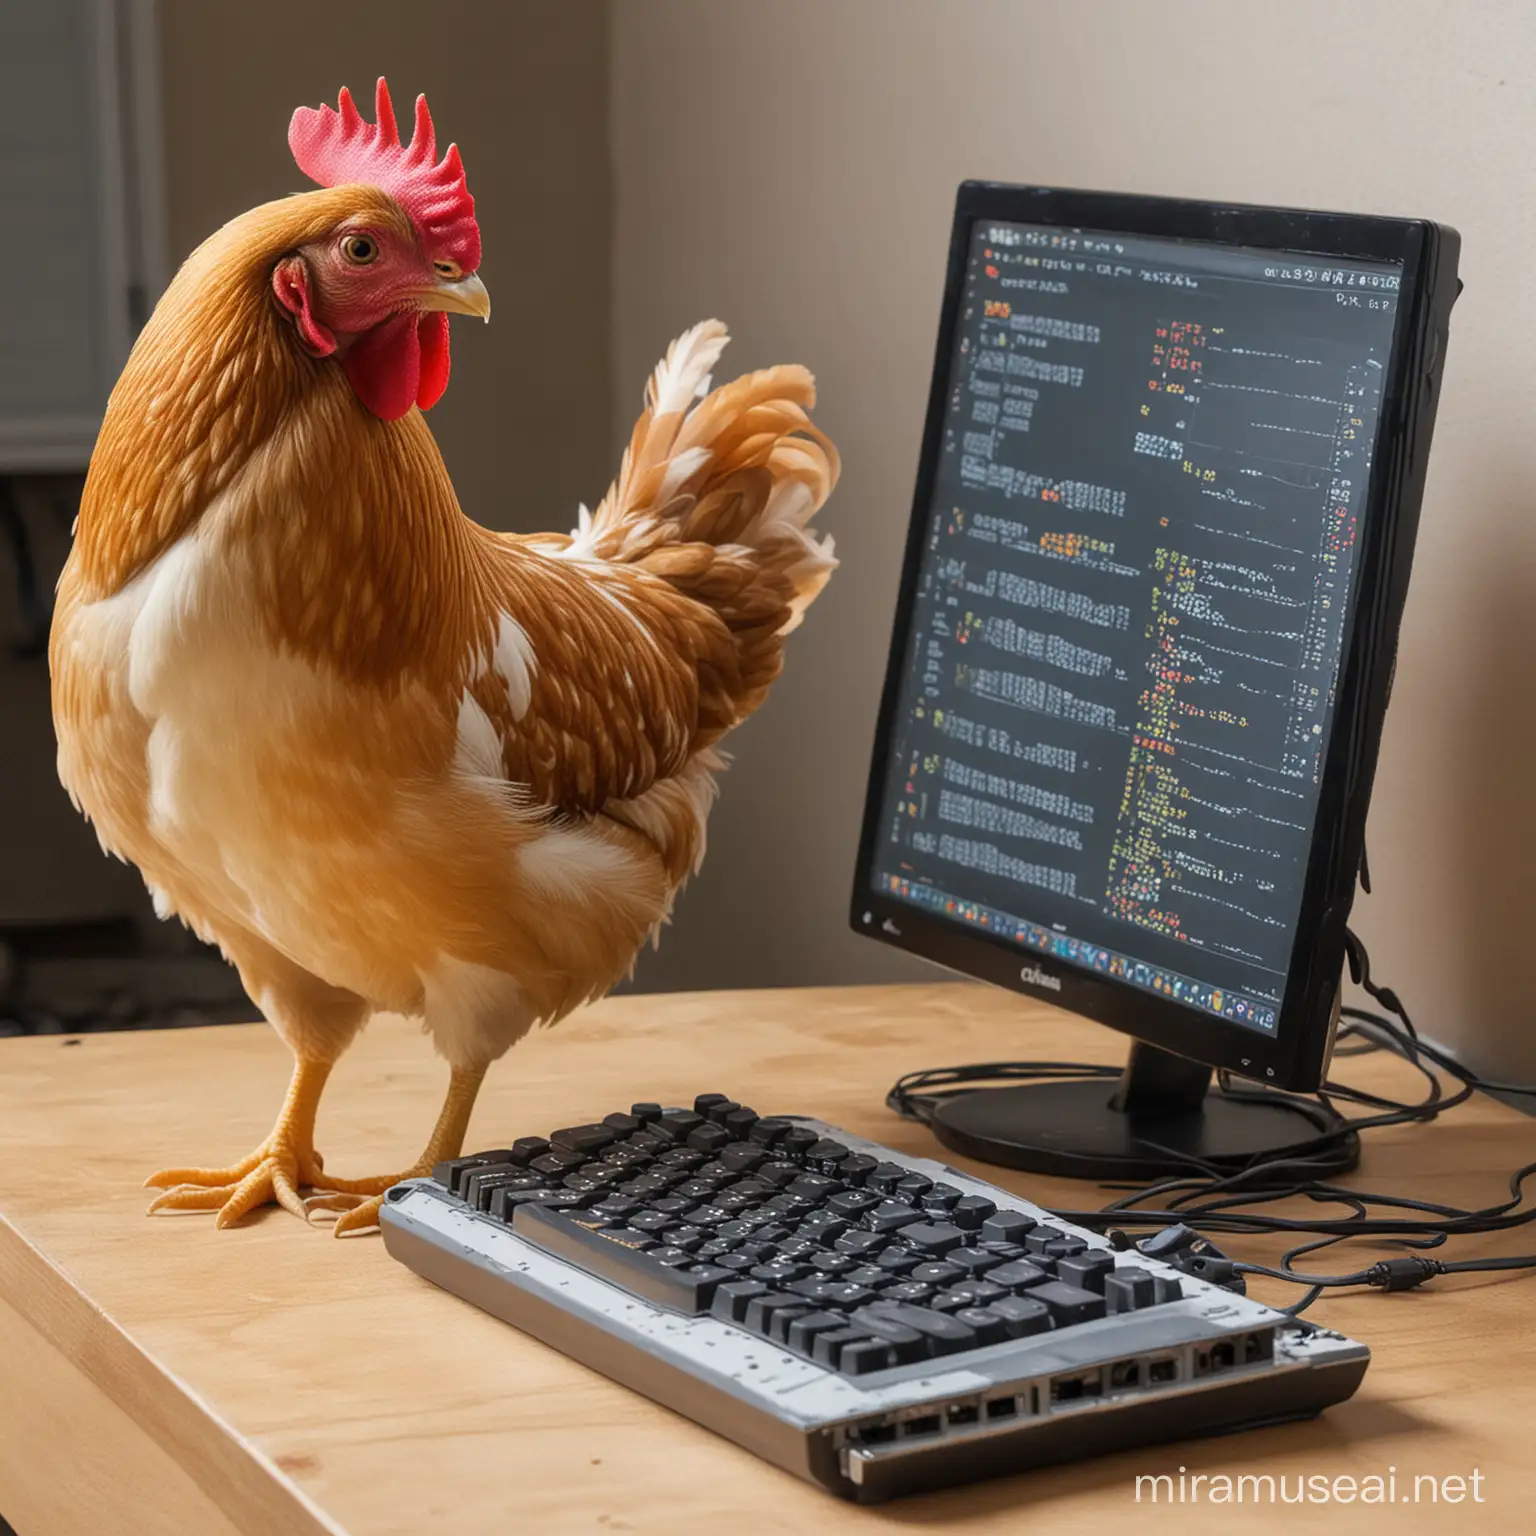 Chicken Learning to Program on Computer